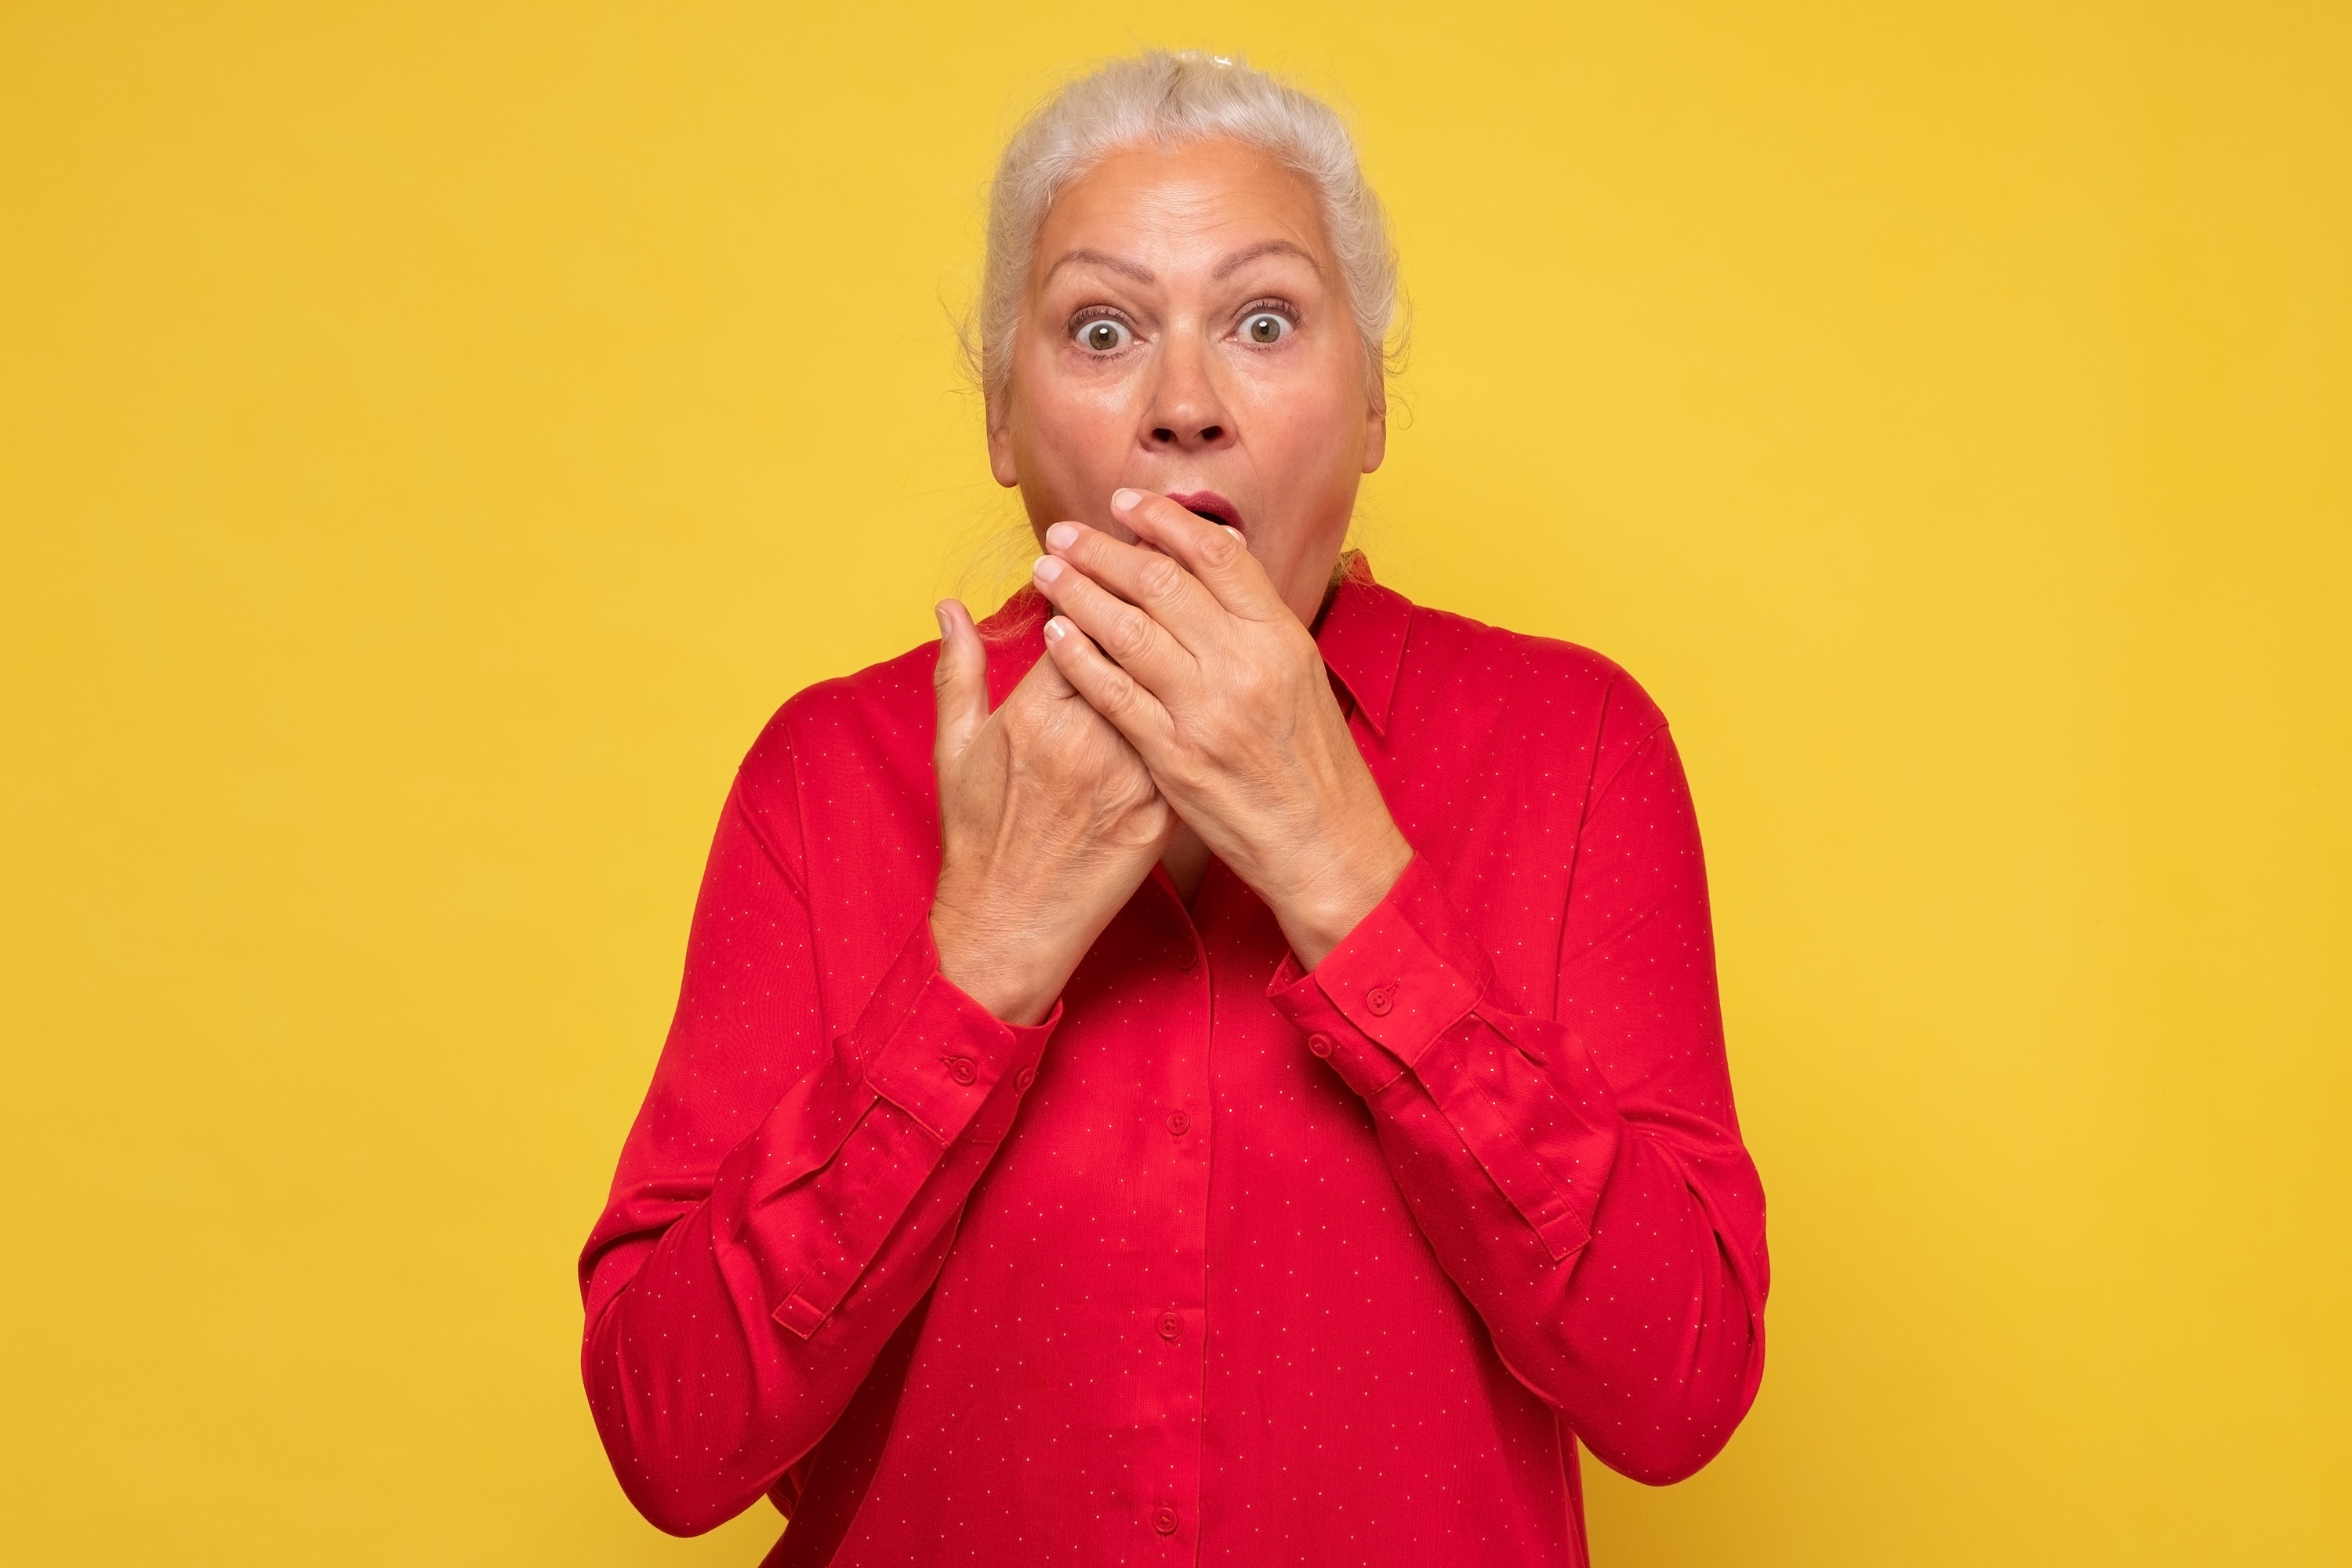 An older woman with a shocked look